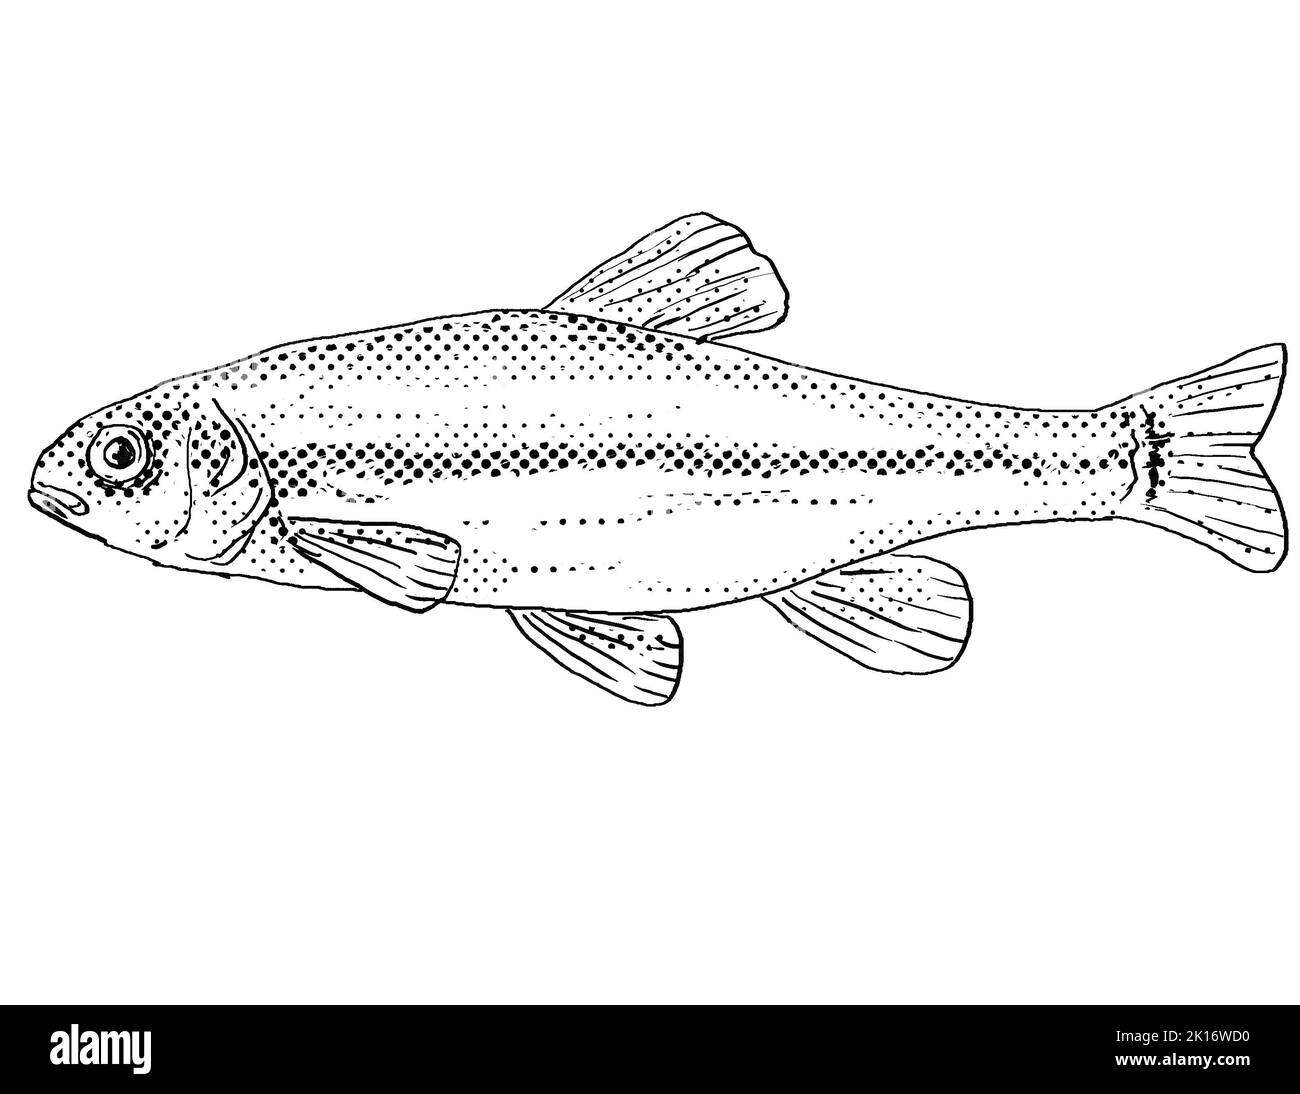 Cartoon style line drawing of a Fathead minnows or Pimephales promelas freshwater fish endemic to North America with halftone dots shading on isolated Stock Photo